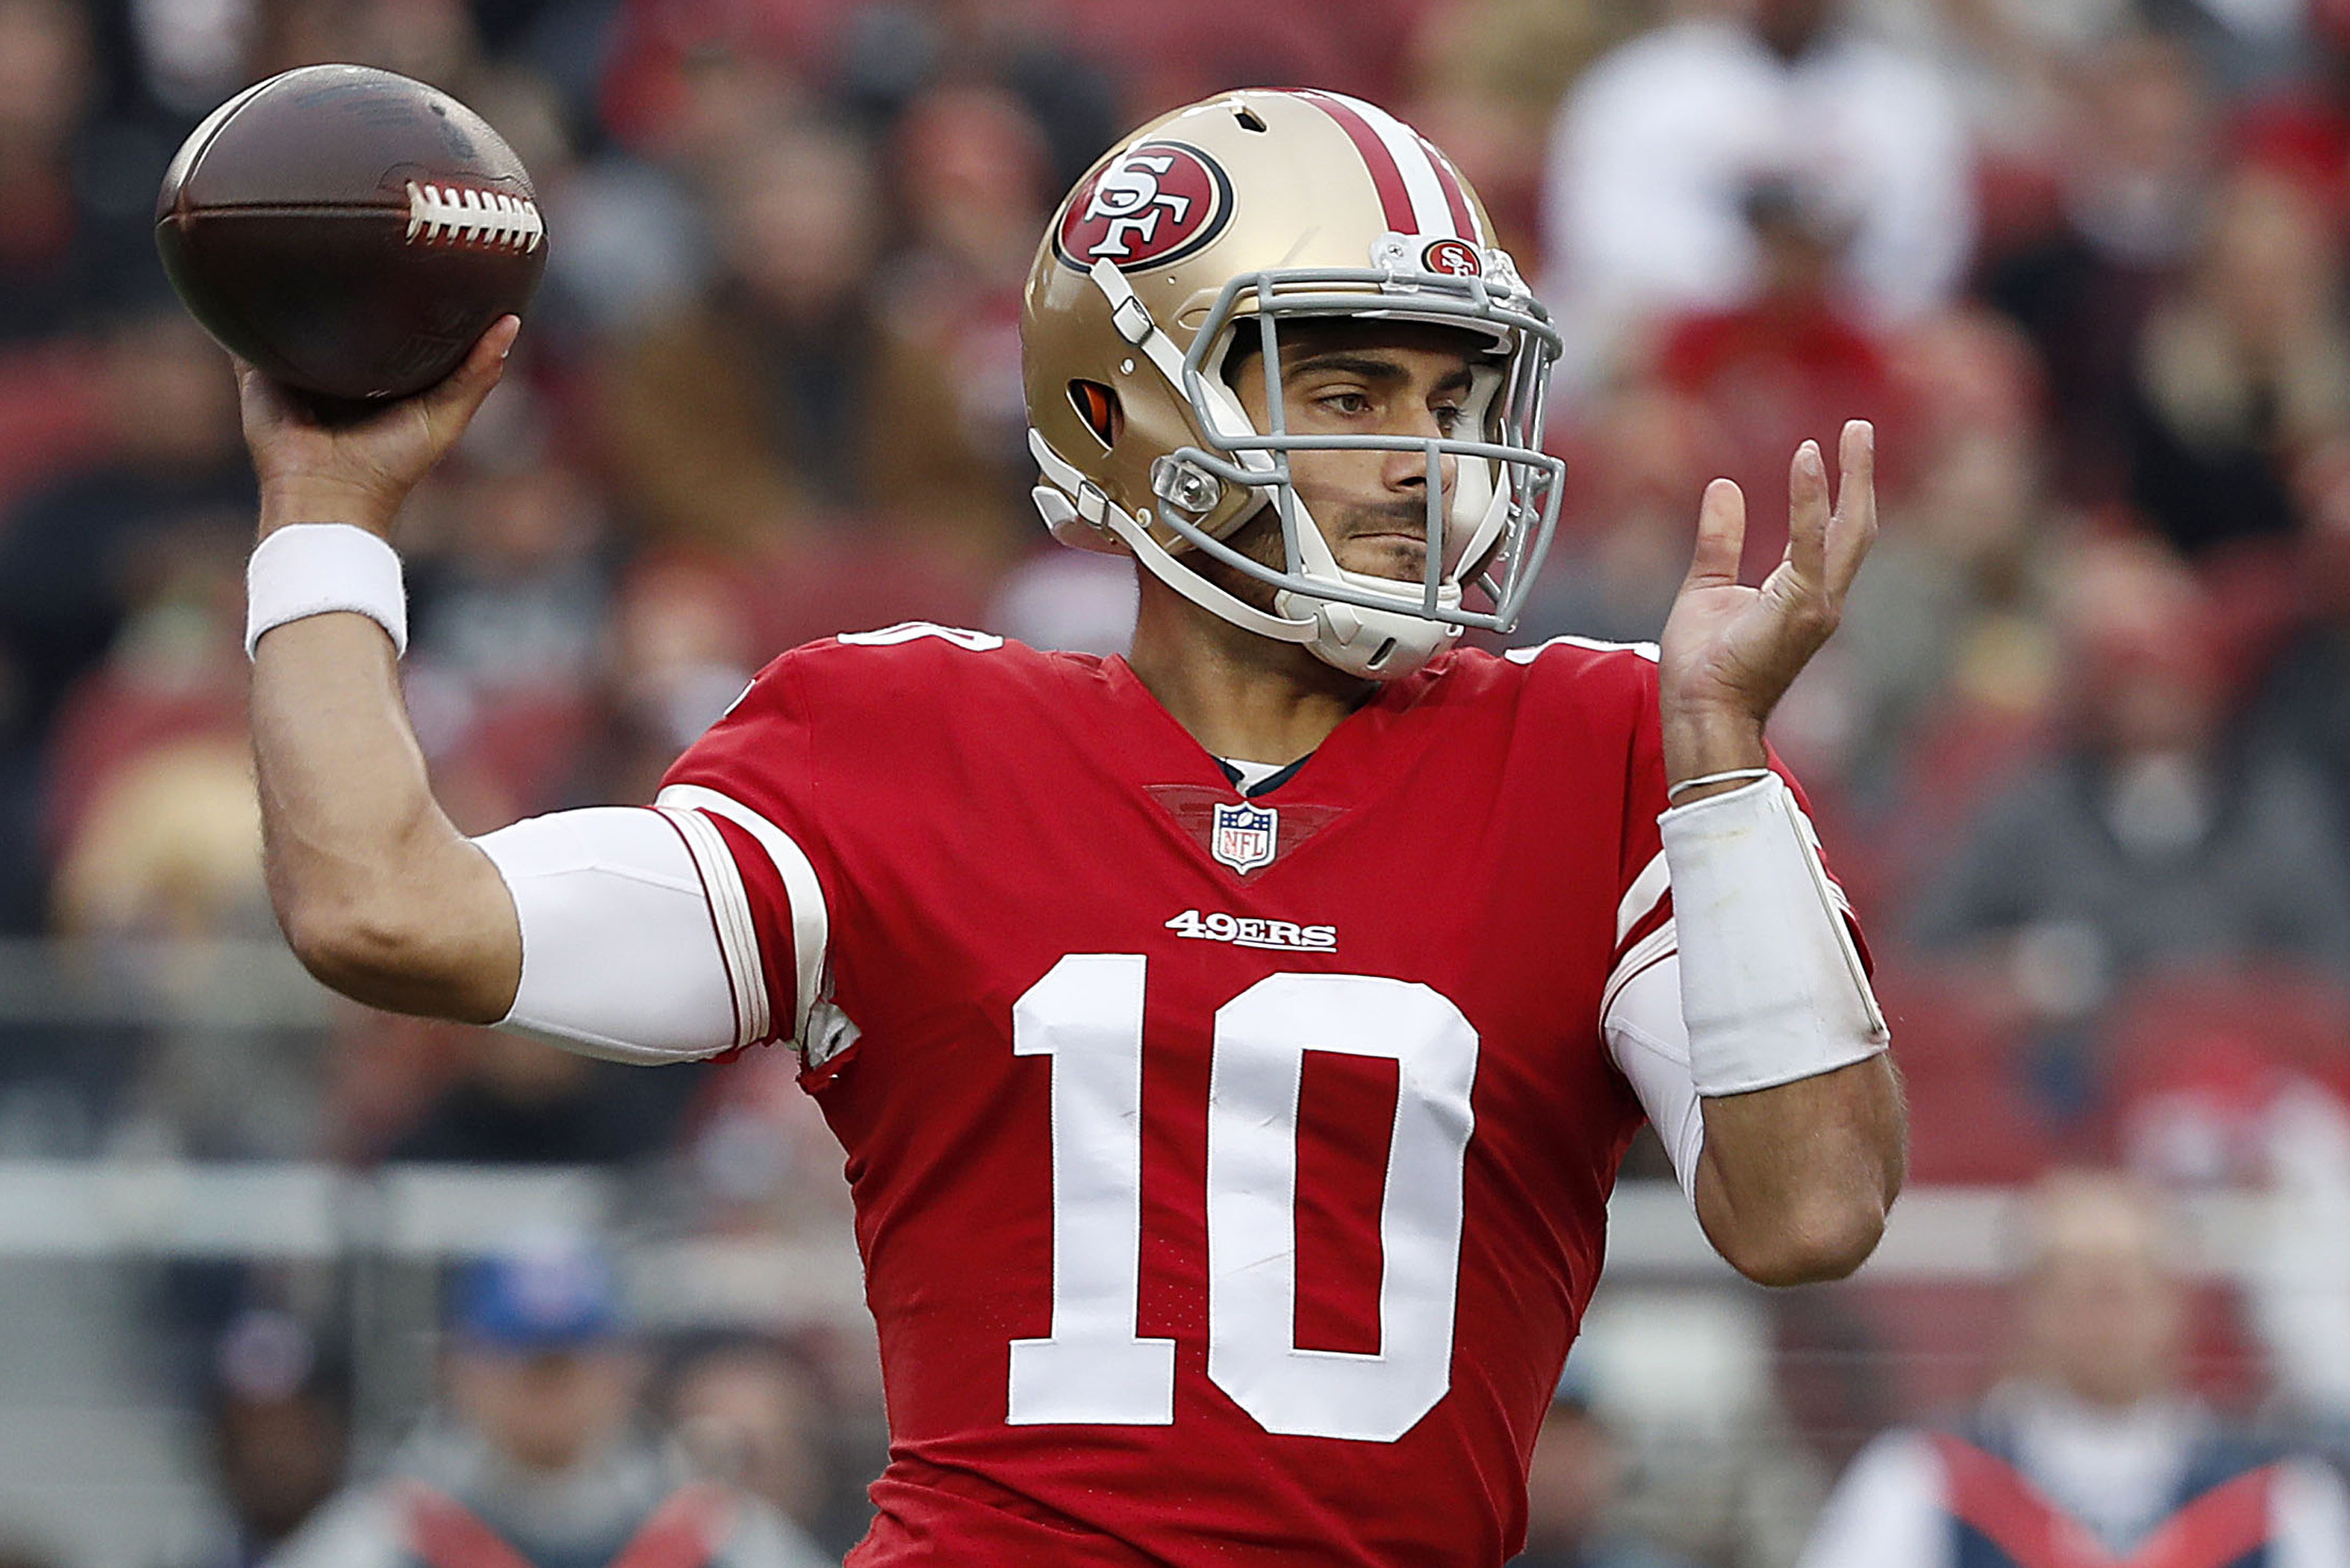 AHeights' Jimmy Garoppolo Signs Record 5-Year NFL Deal With 49ers